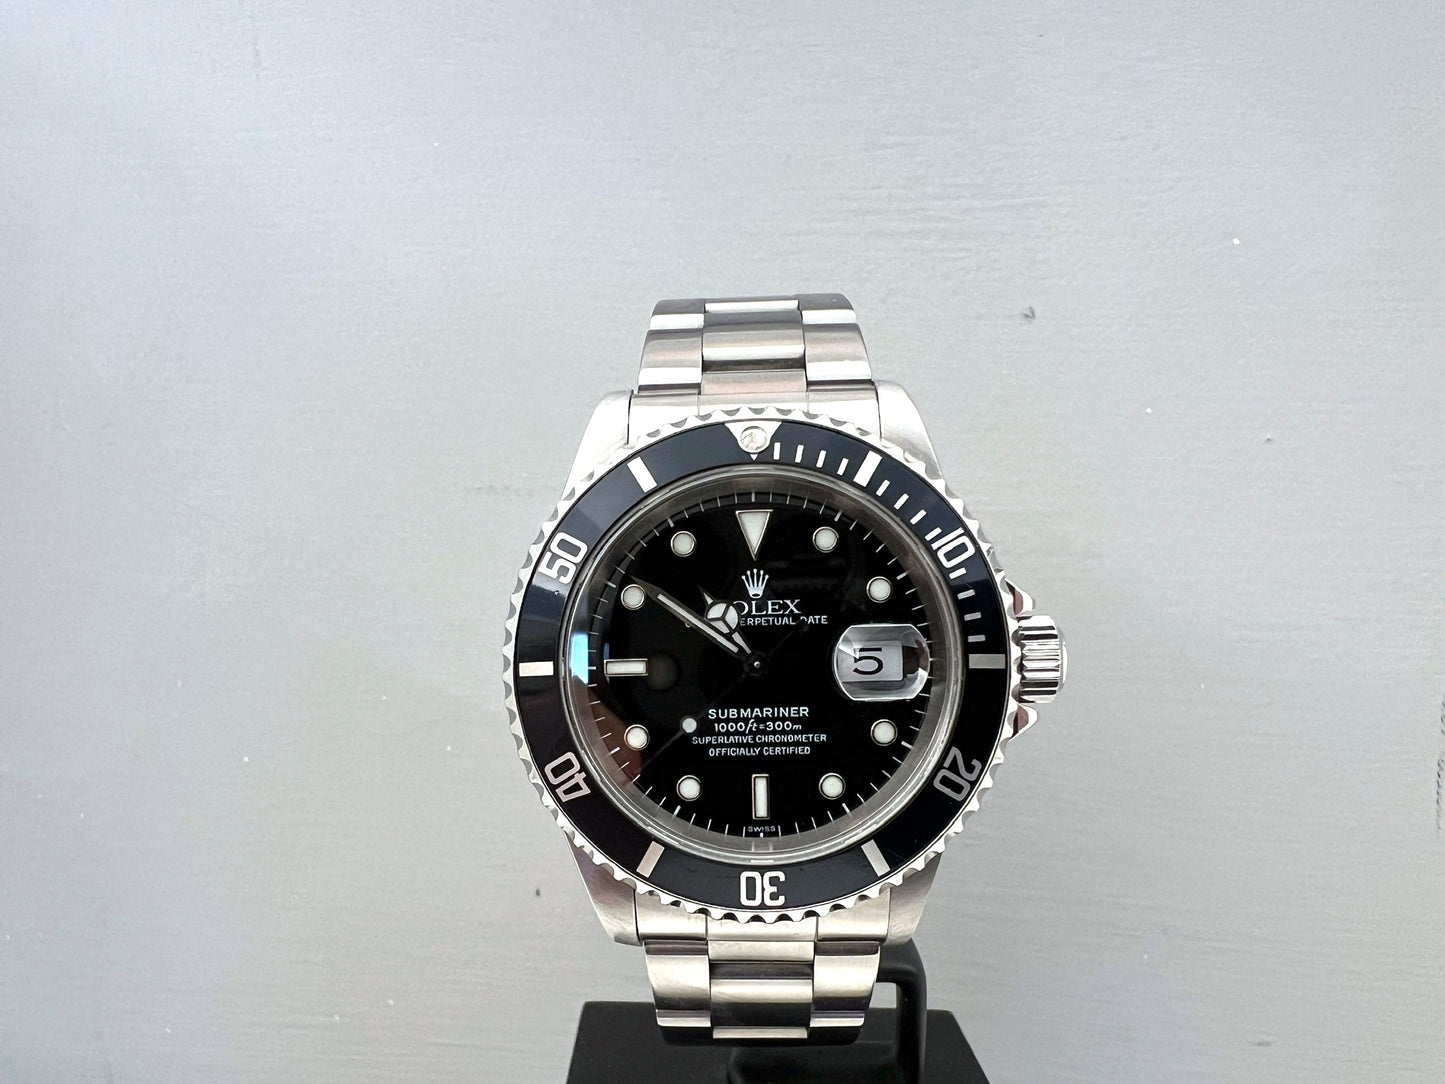 Rolex Submariner 16610 only "SWISS" dial